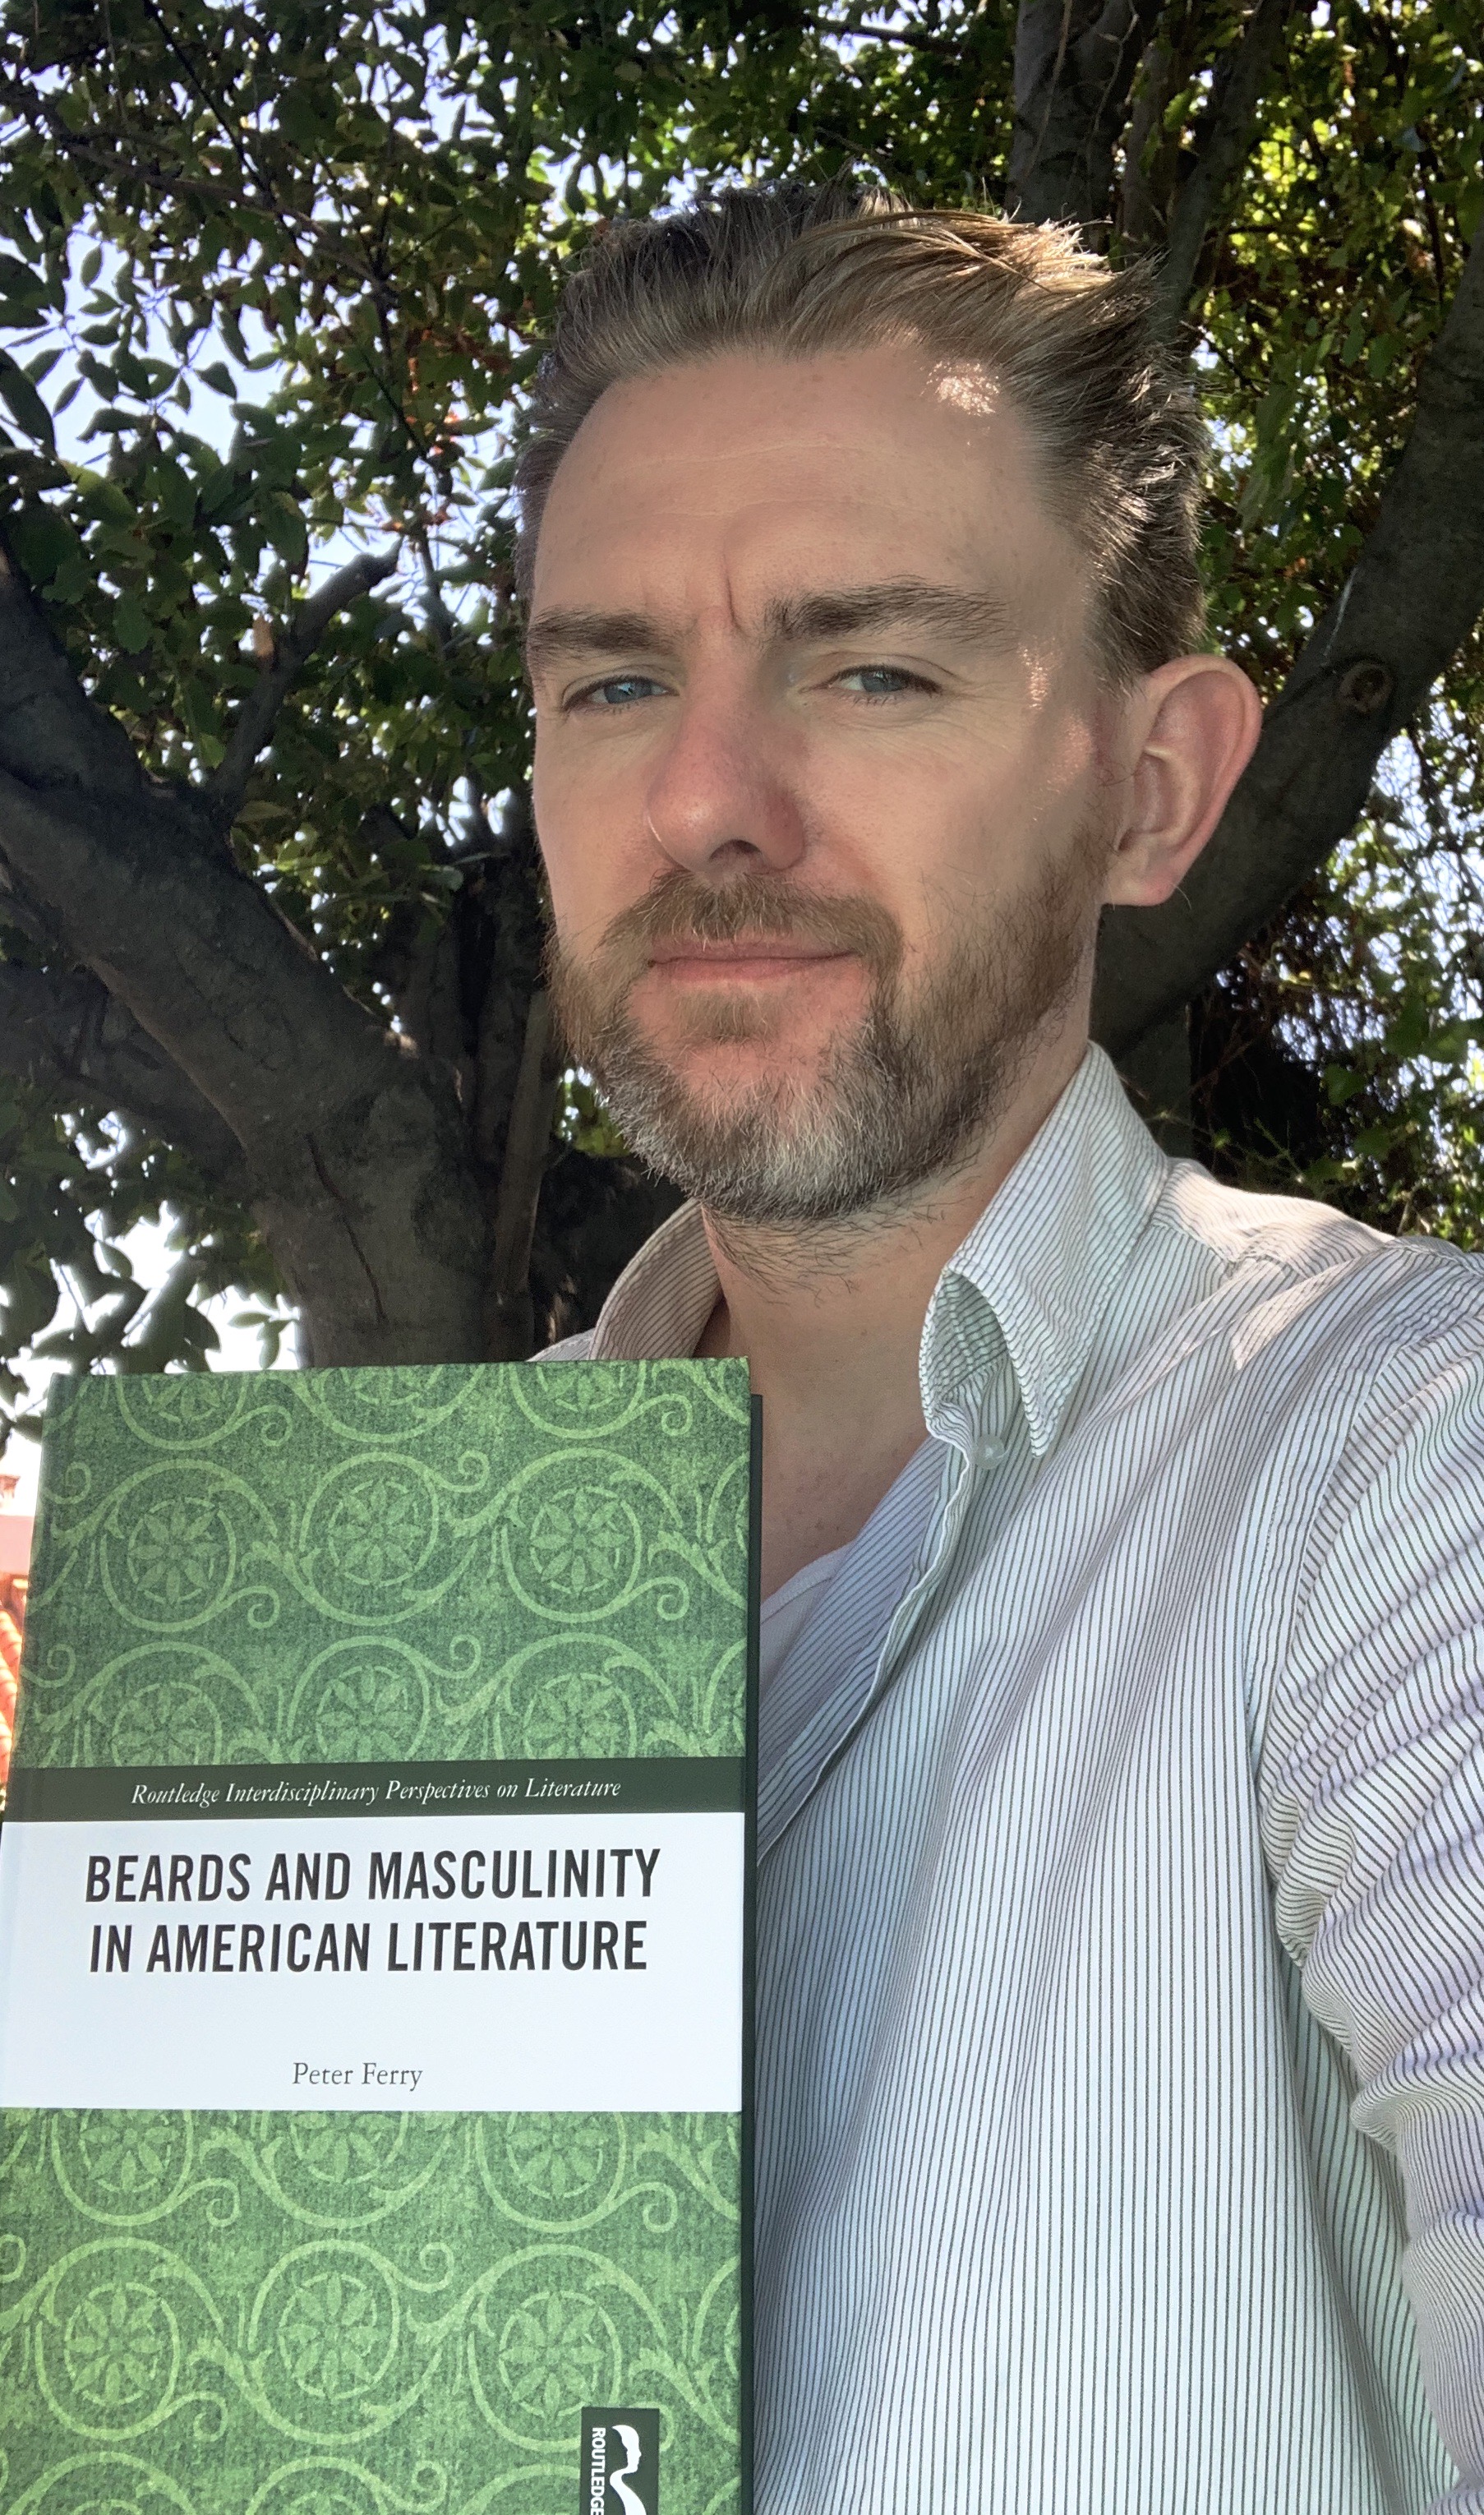 Beards and Masculinity in American Literature (Routledge 2020)